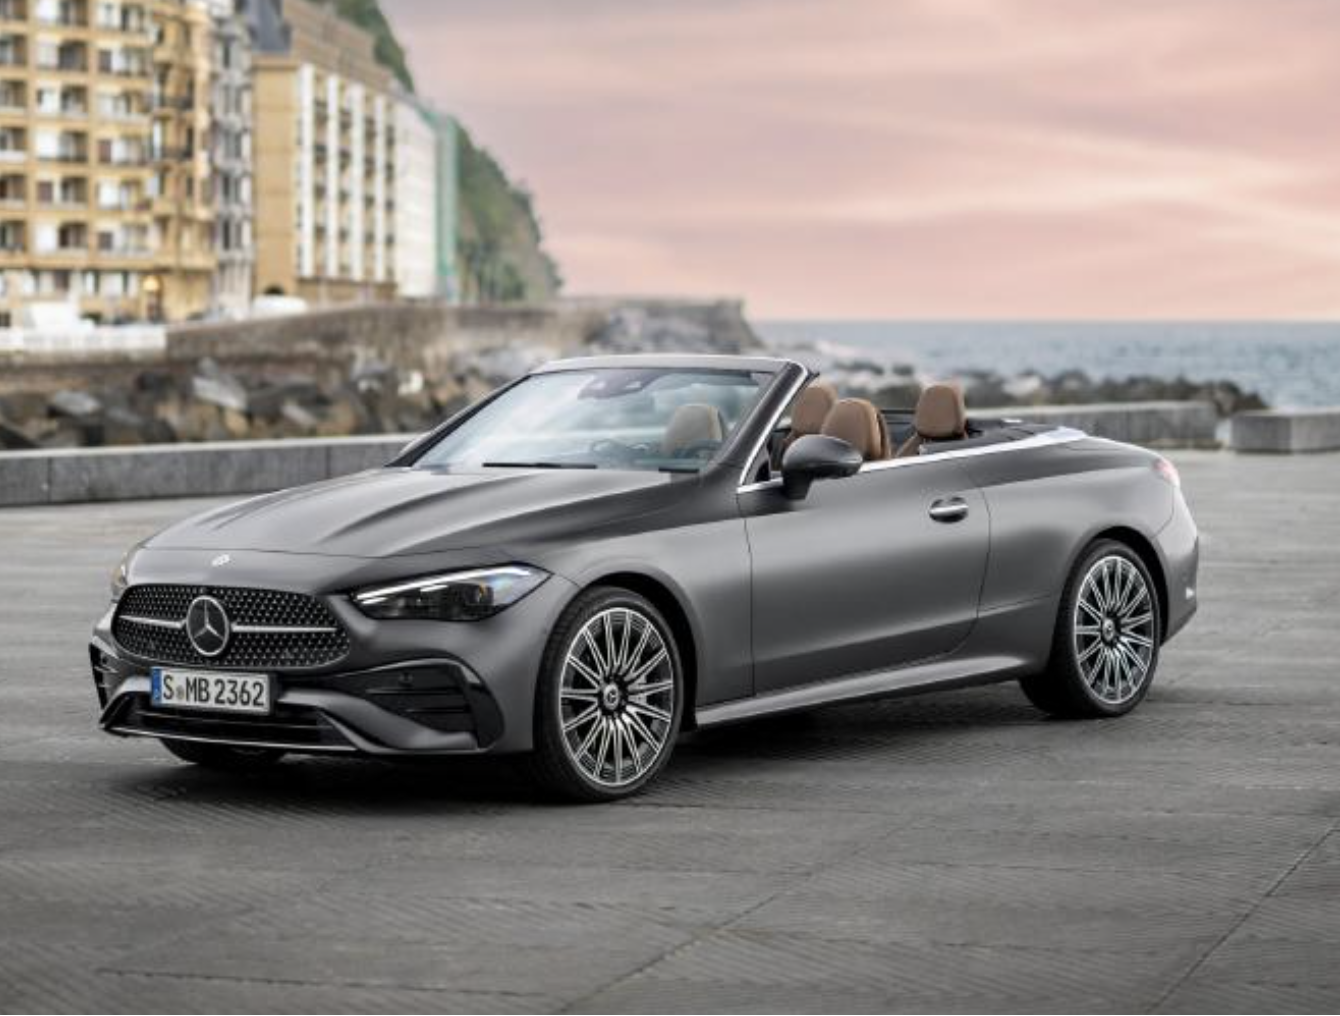 Mercedes Benz Cabriolet convertible with seaside backdrop